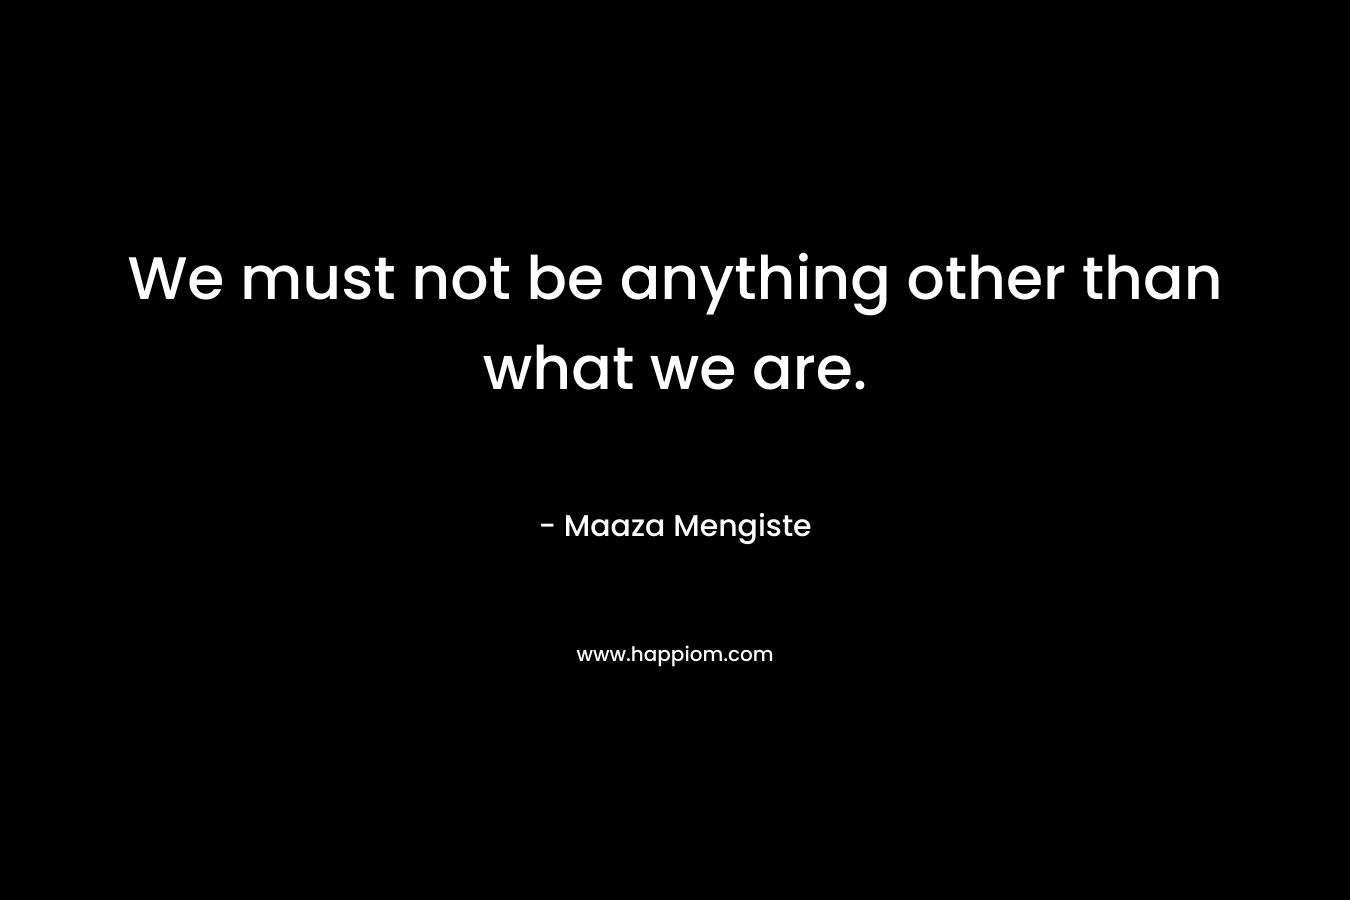 We must not be anything other than what we are. – Maaza Mengiste